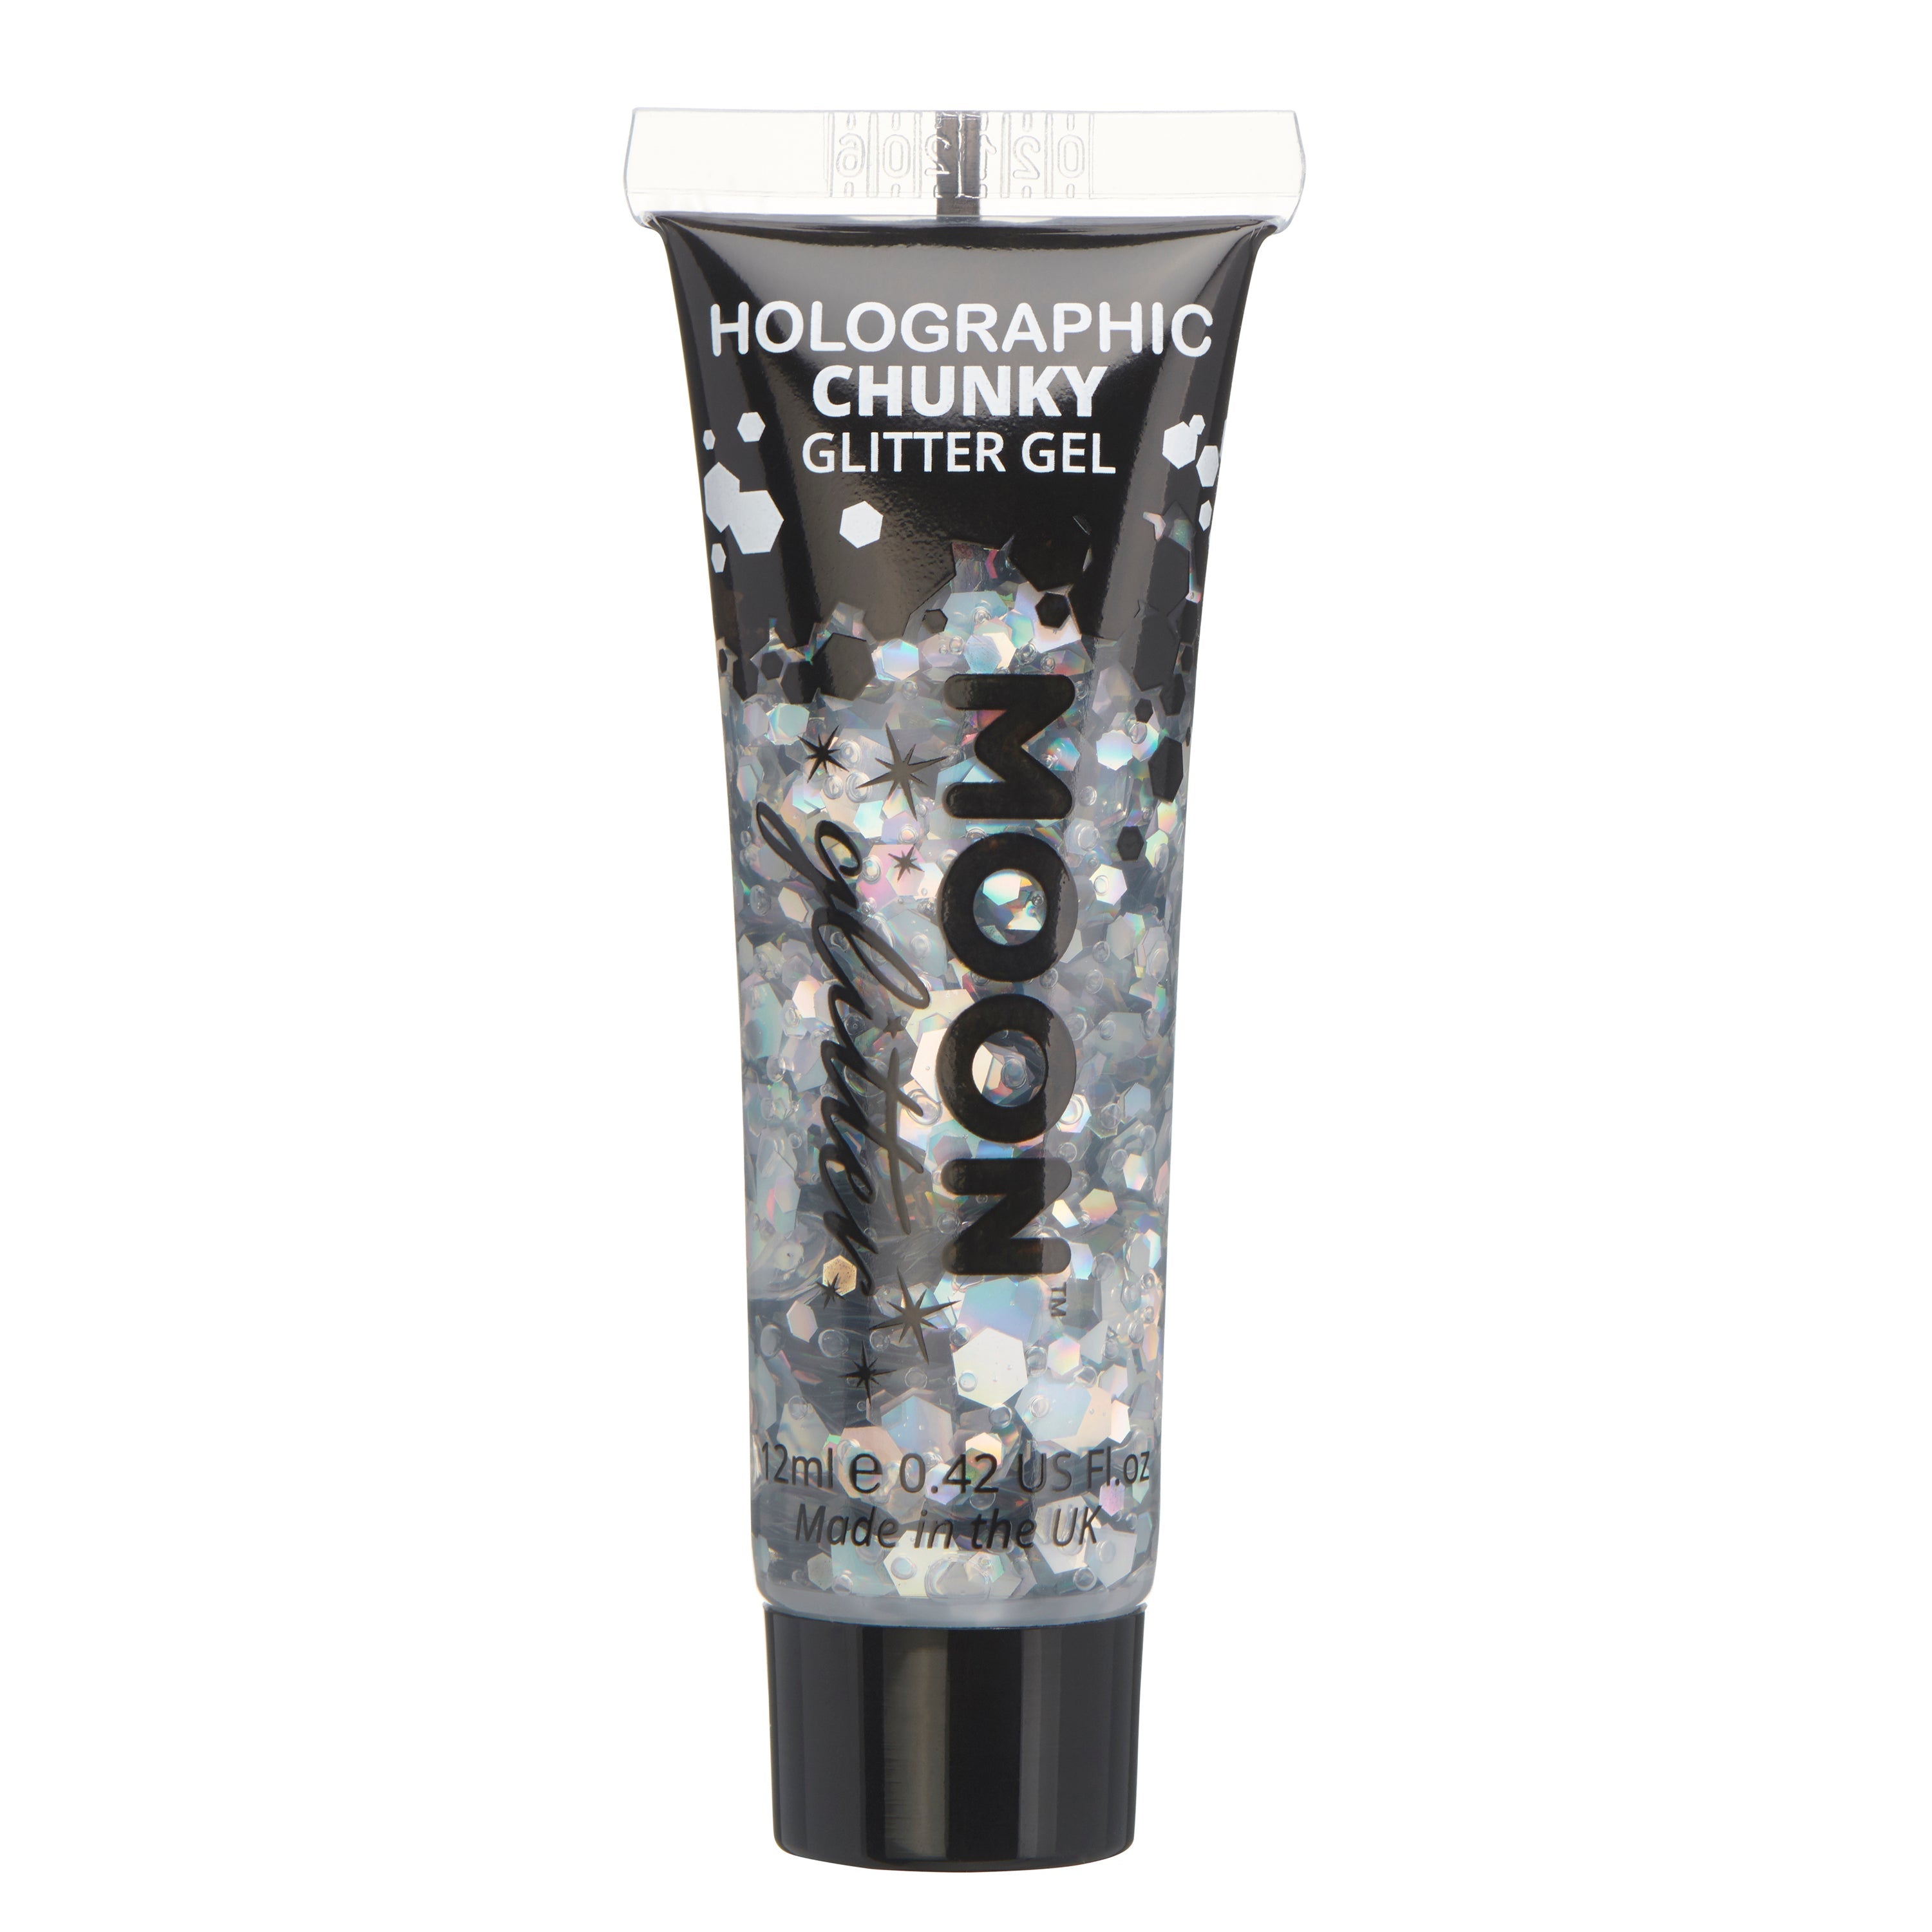 Silver - Holographic Chunky Face & Body Glitter Gel, 12mL. Cosmetically certified, FDA & Health Canada compliant, cruelty free and vegan.